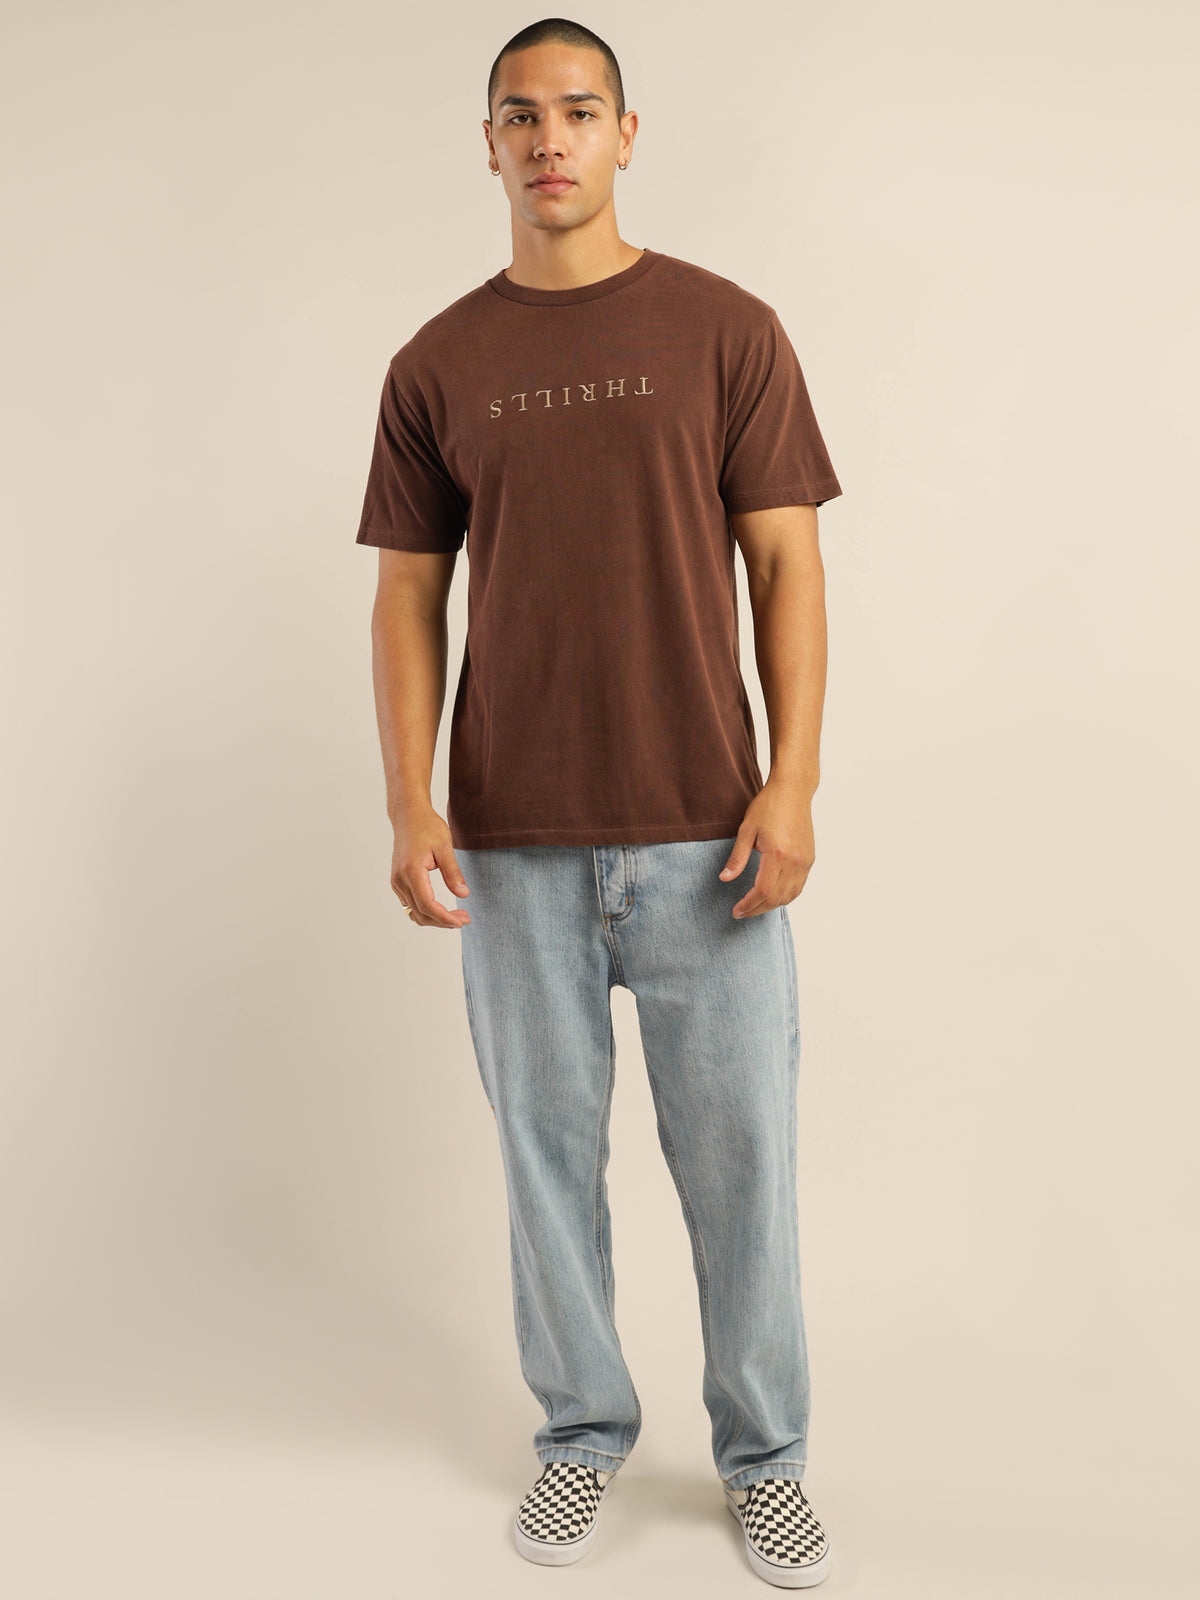 Liste Embro Merch Fit T-Shirt in Washed Cocoa